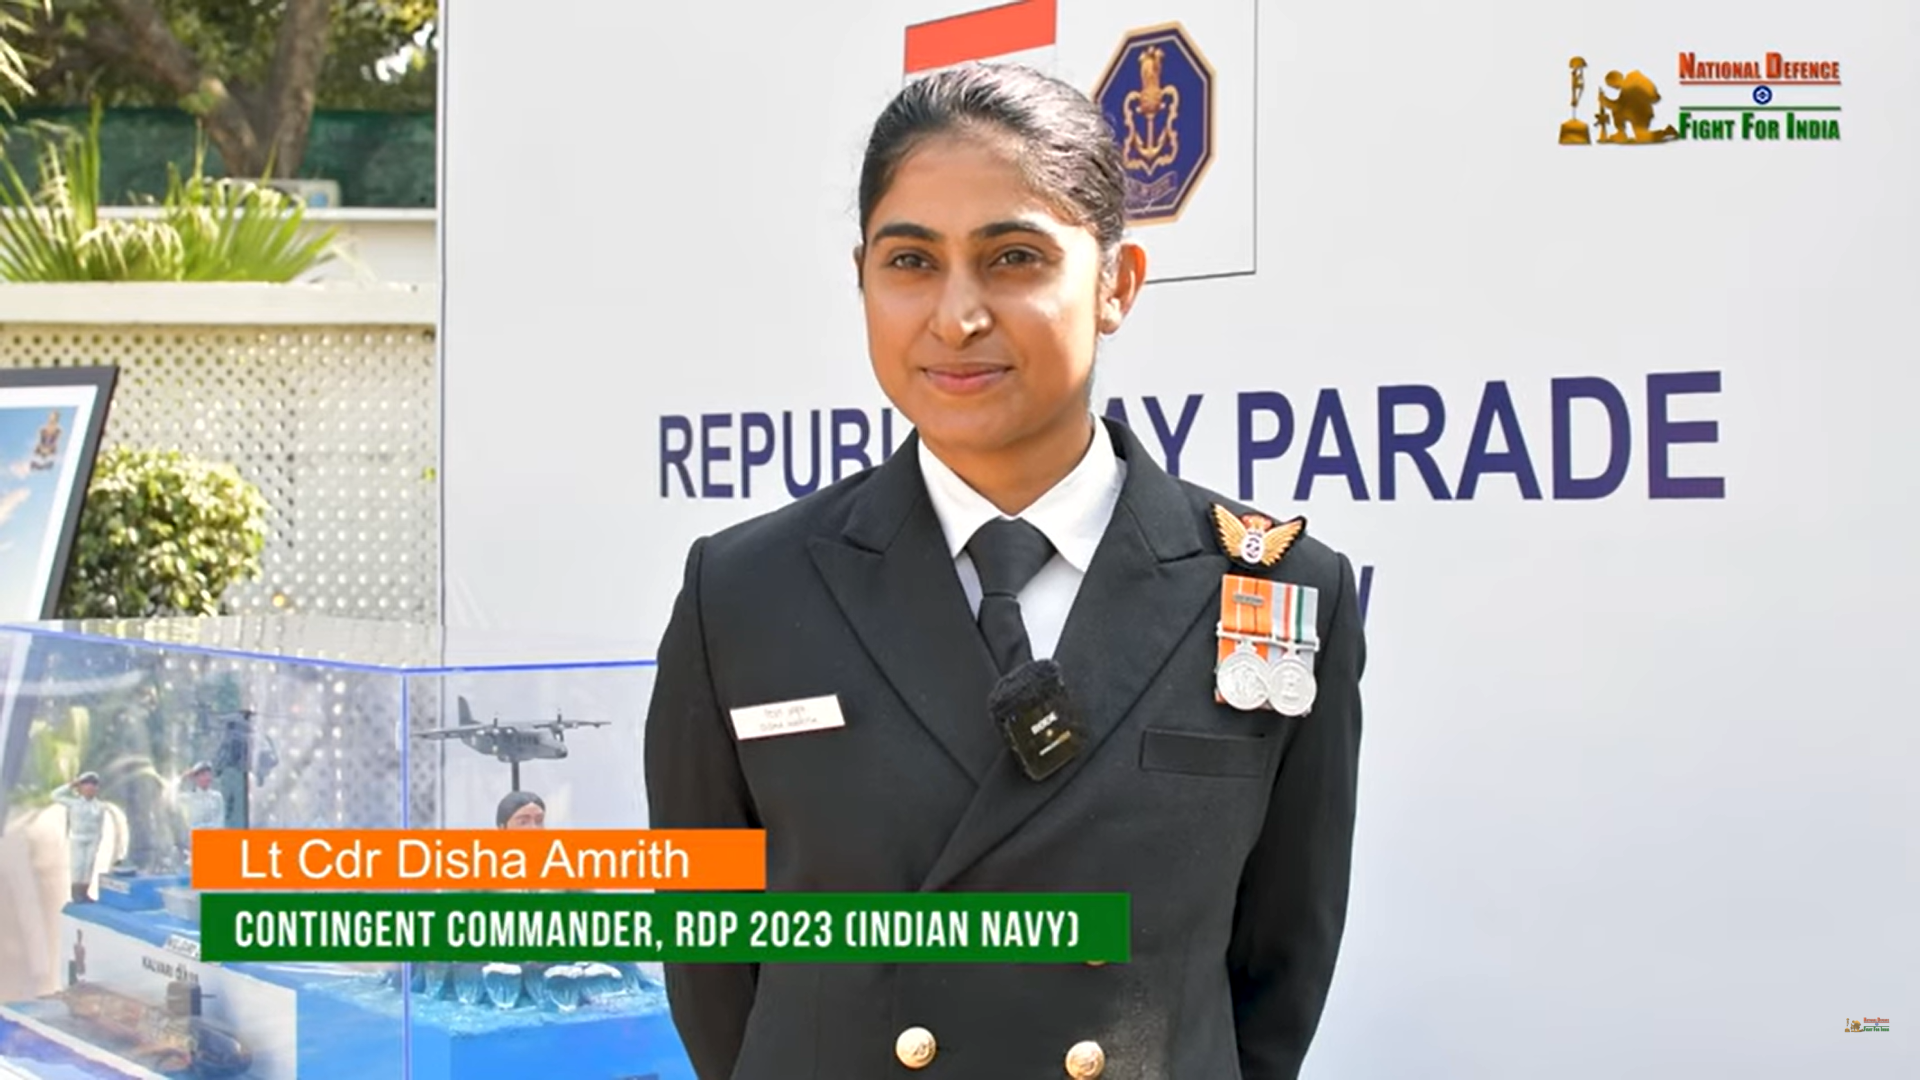 Lt Cdr Disha Amrith, an officer from Karnataka commanding the Republic Day contingent